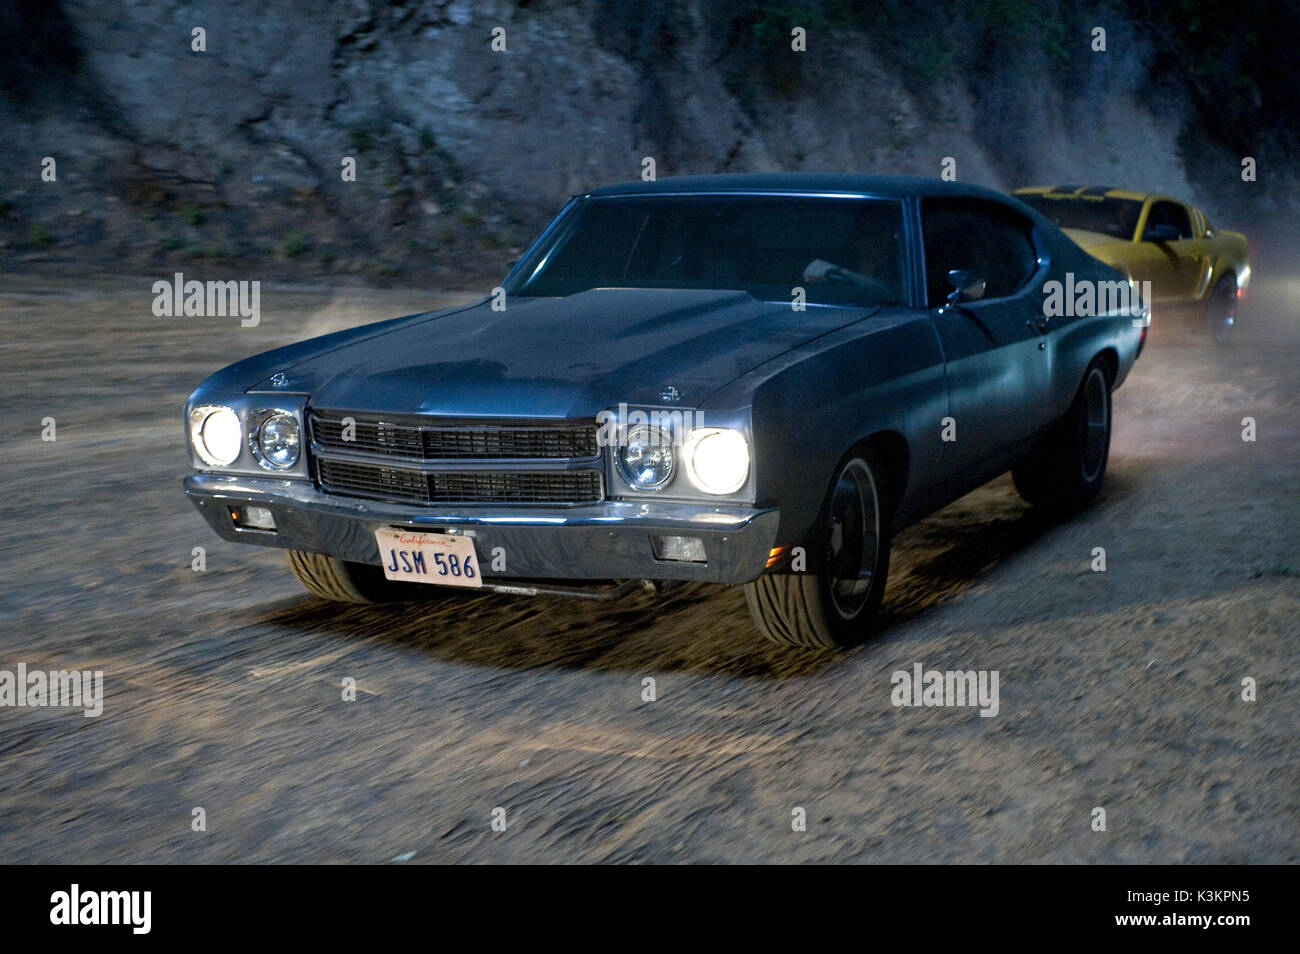 FAST & FURIOUS [US 2009] alias FAST & FURIOUS 4 Dom Toretto's 1970 Chevy Chevelle data: 2009 Foto Stock